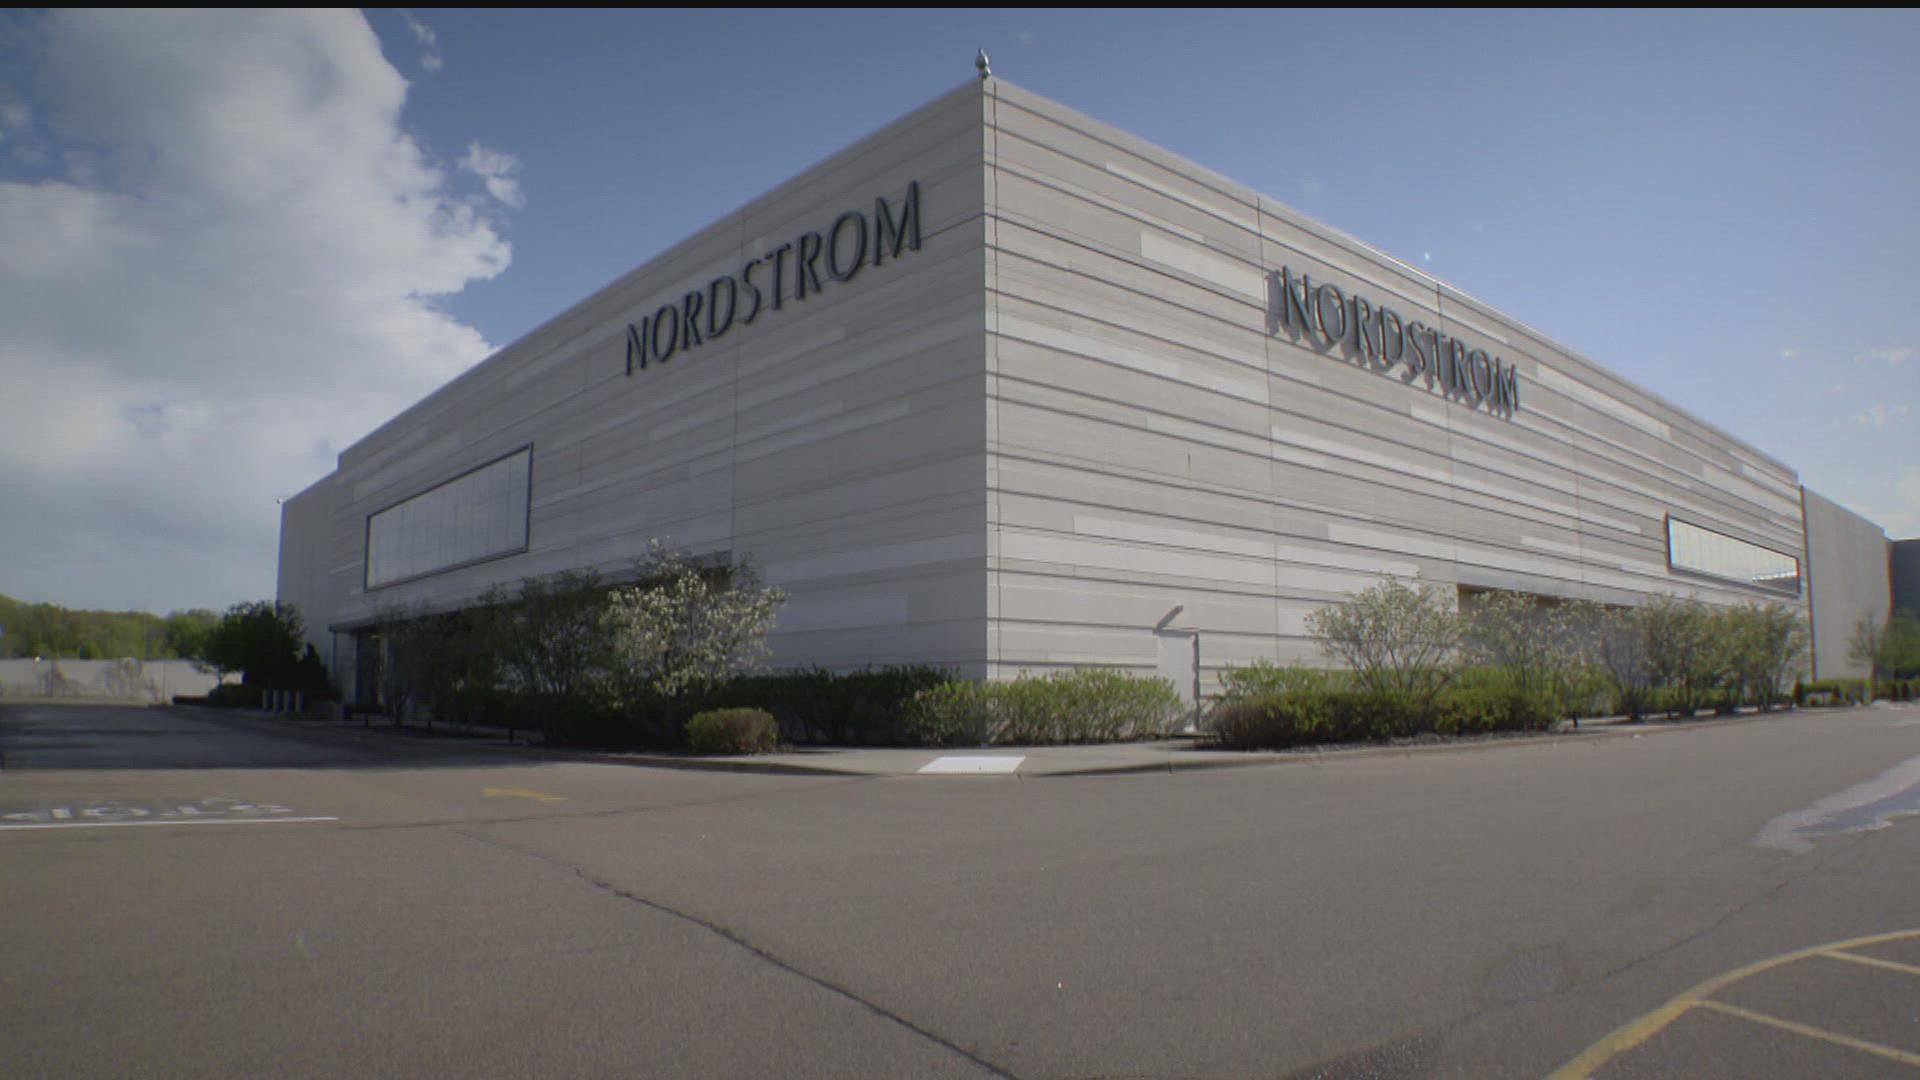 Minnetonka Police said two people, who worked at the Nordstrom department store, were arrested on felony theft.